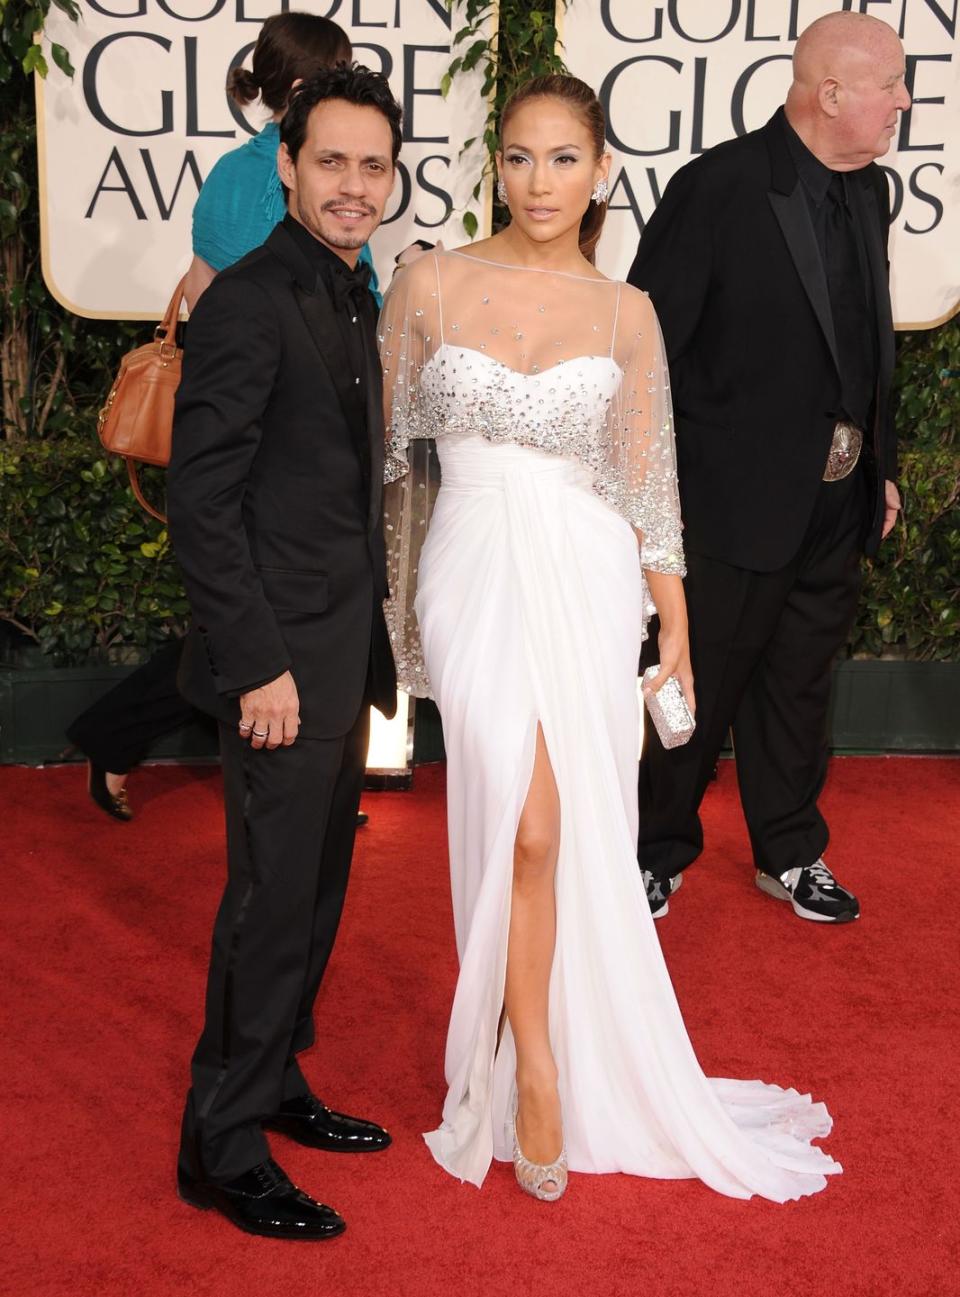 <p><strong>When: </strong>January 2011</p><p><strong>Where: </strong>The Golden Globes</p><p><strong>Wearing: </strong>Zuhair Murad</p>